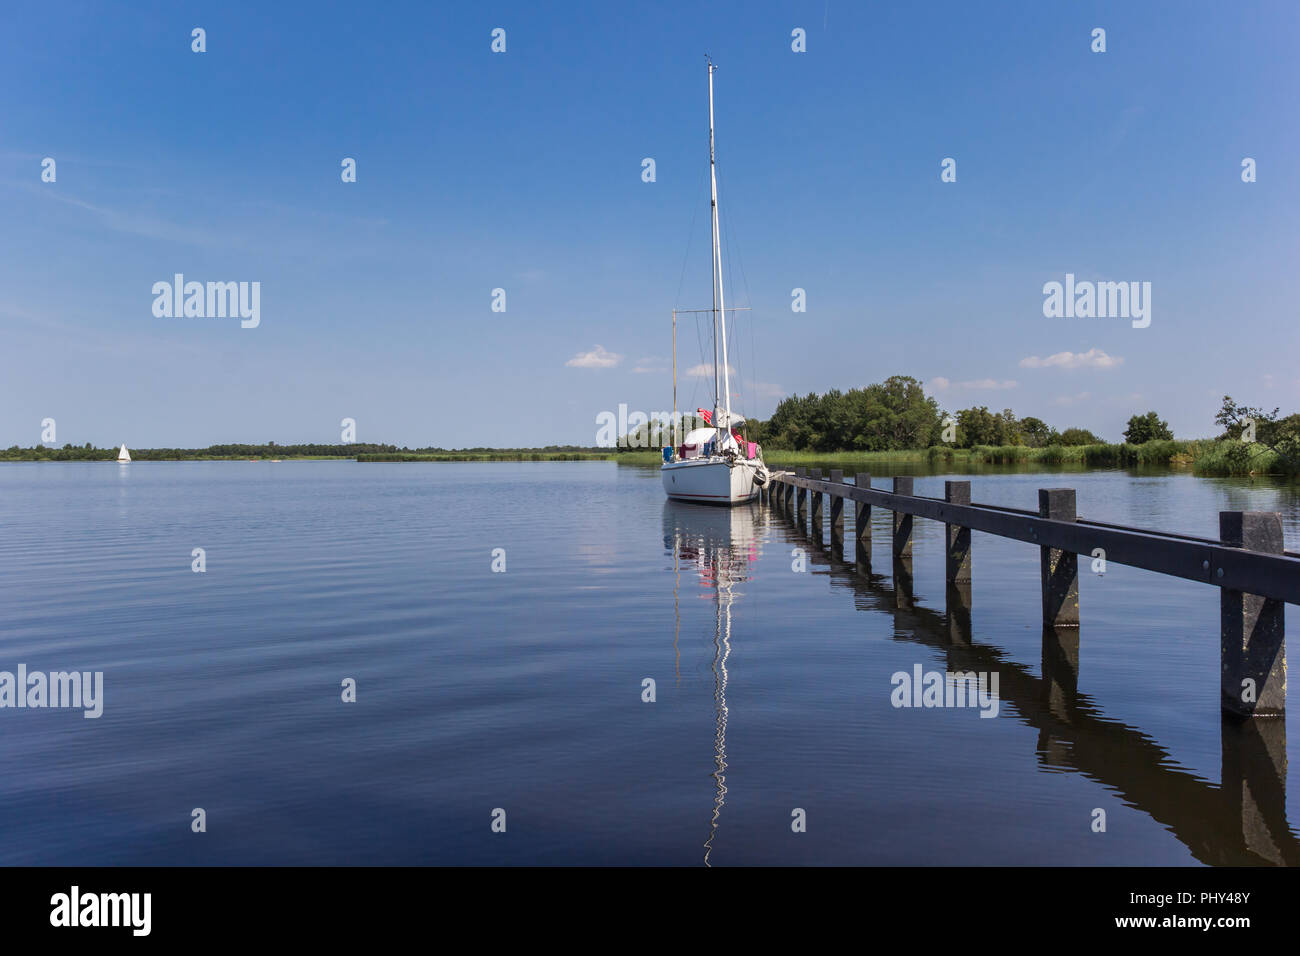 Sailing ship at a jetty in National Park Weerribben-Wieden, Netherlands Stock Photo